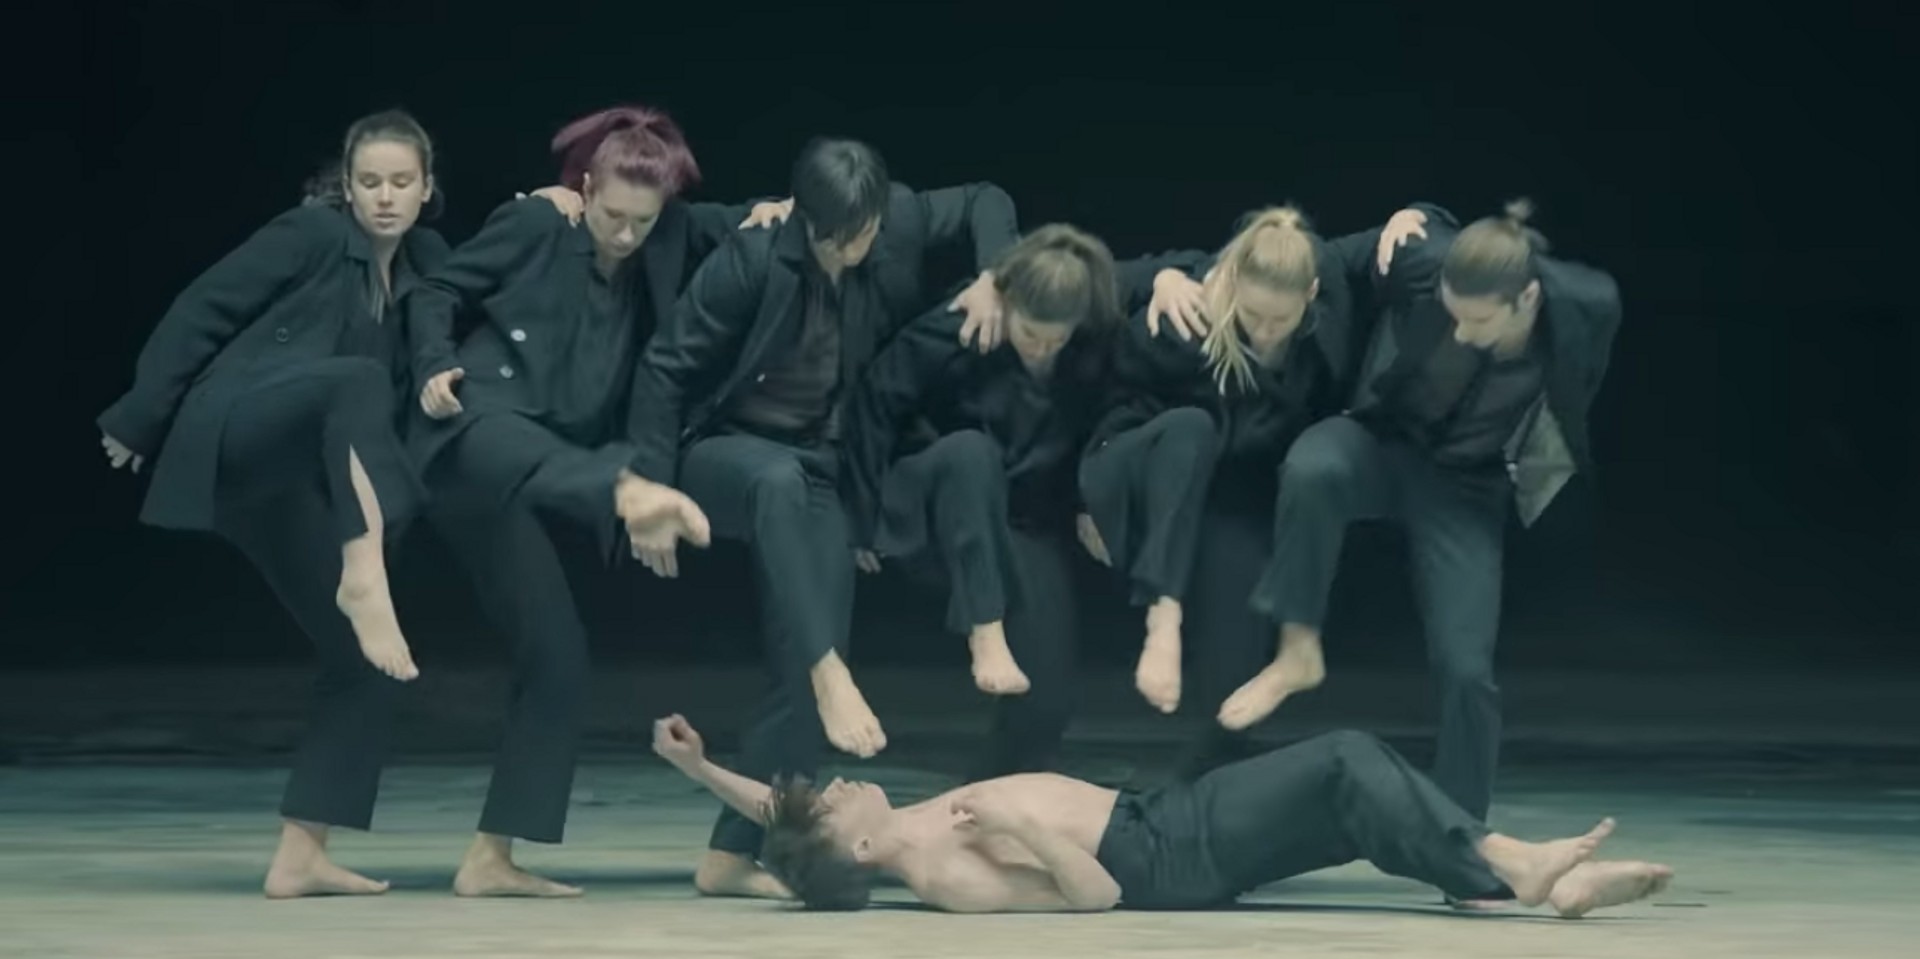 Twitter reacts to BTS' 'Black Swan' music video  